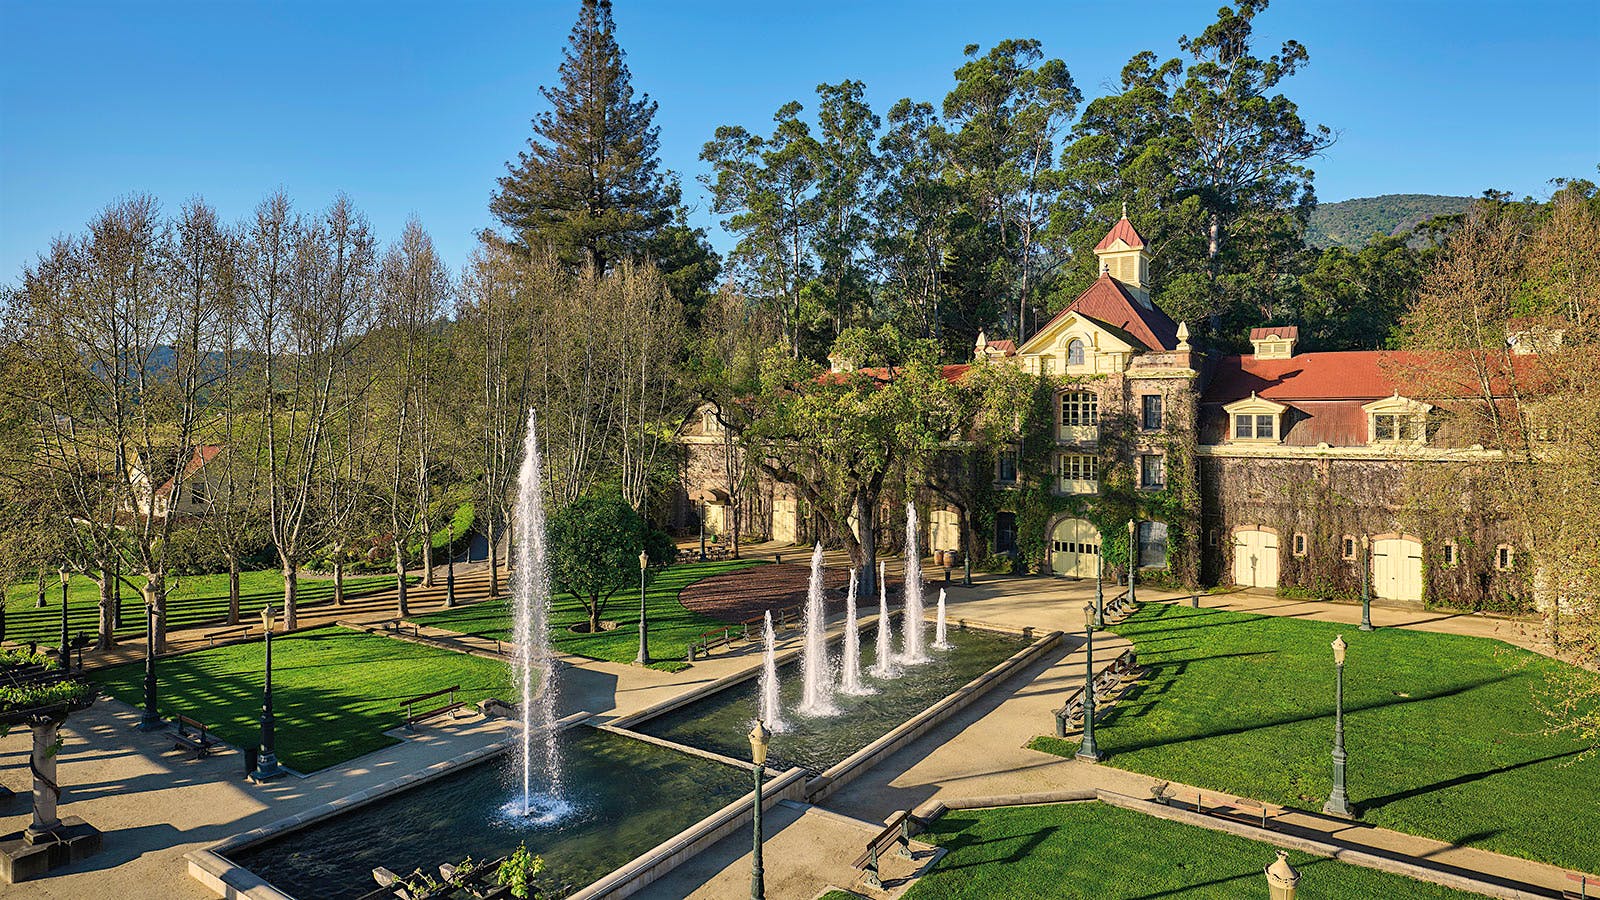 Landscape view of Inglenook winery in Napa Valley, California, with its courtyard fountain